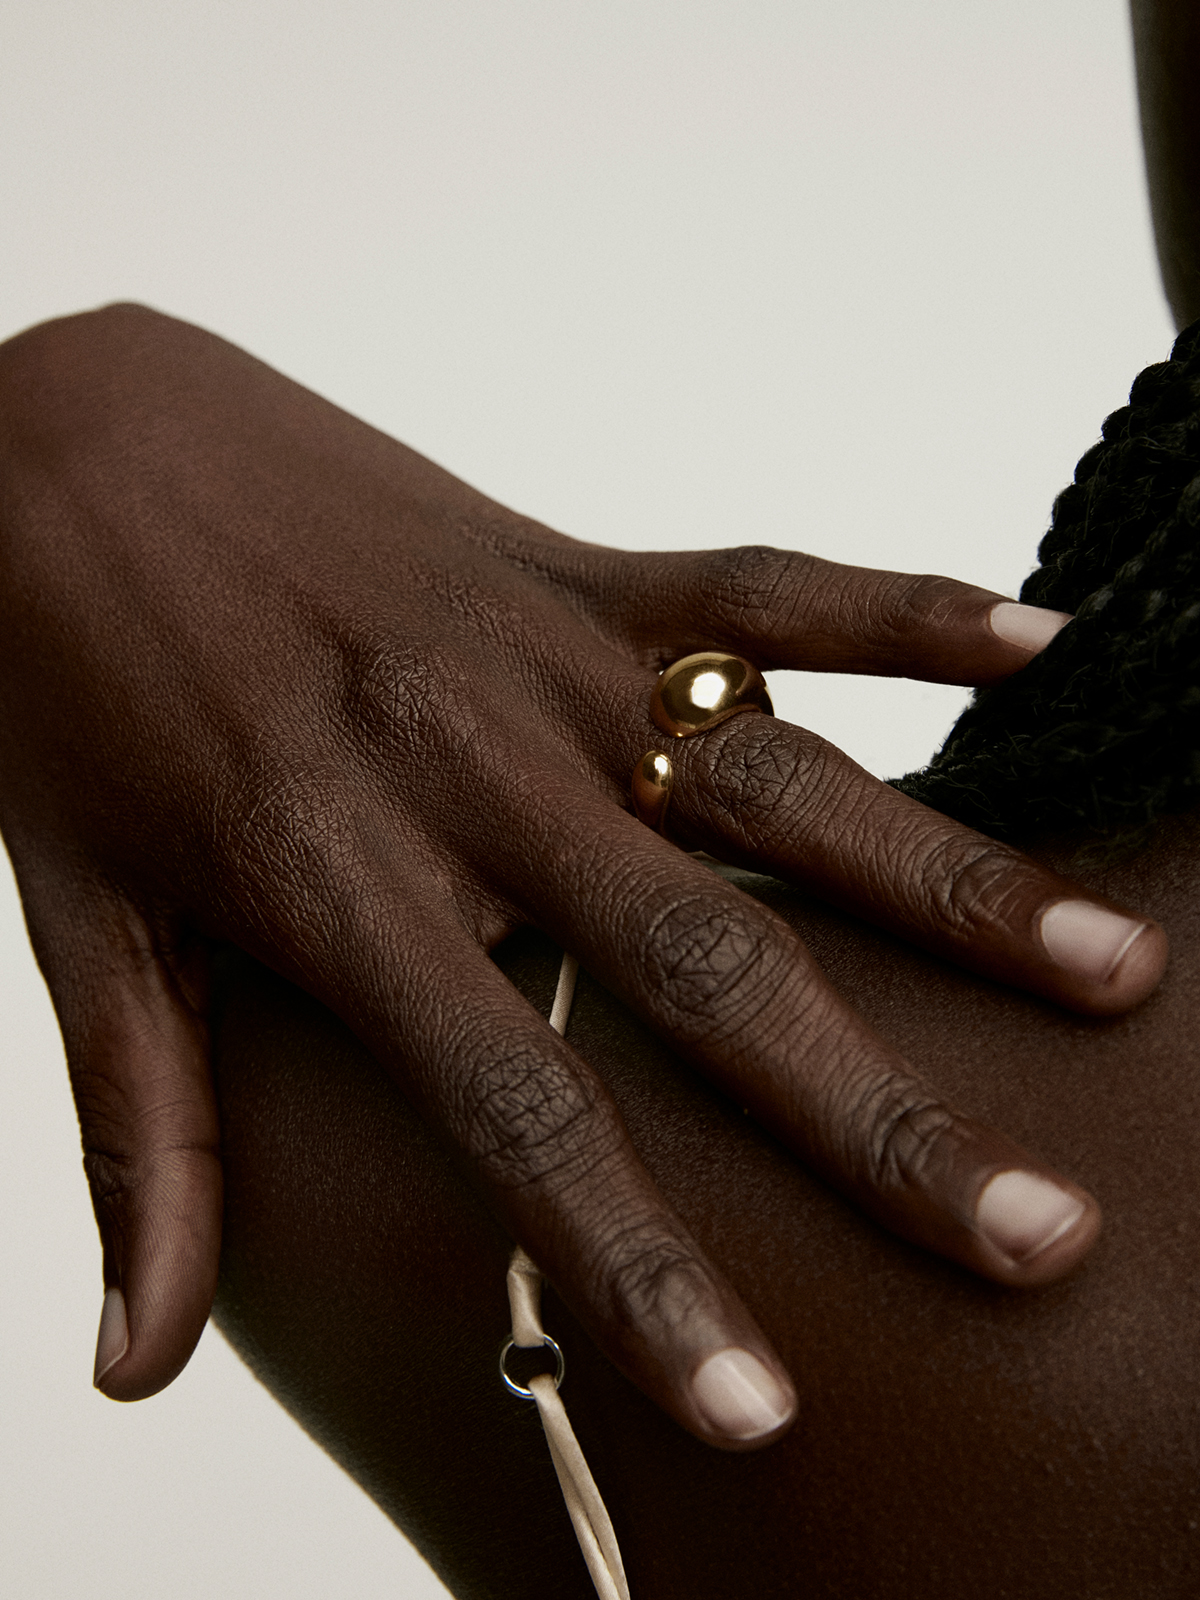 Tú y Yo ring made of 925 silver, bathed in 18K yellow gold with a domed shape.